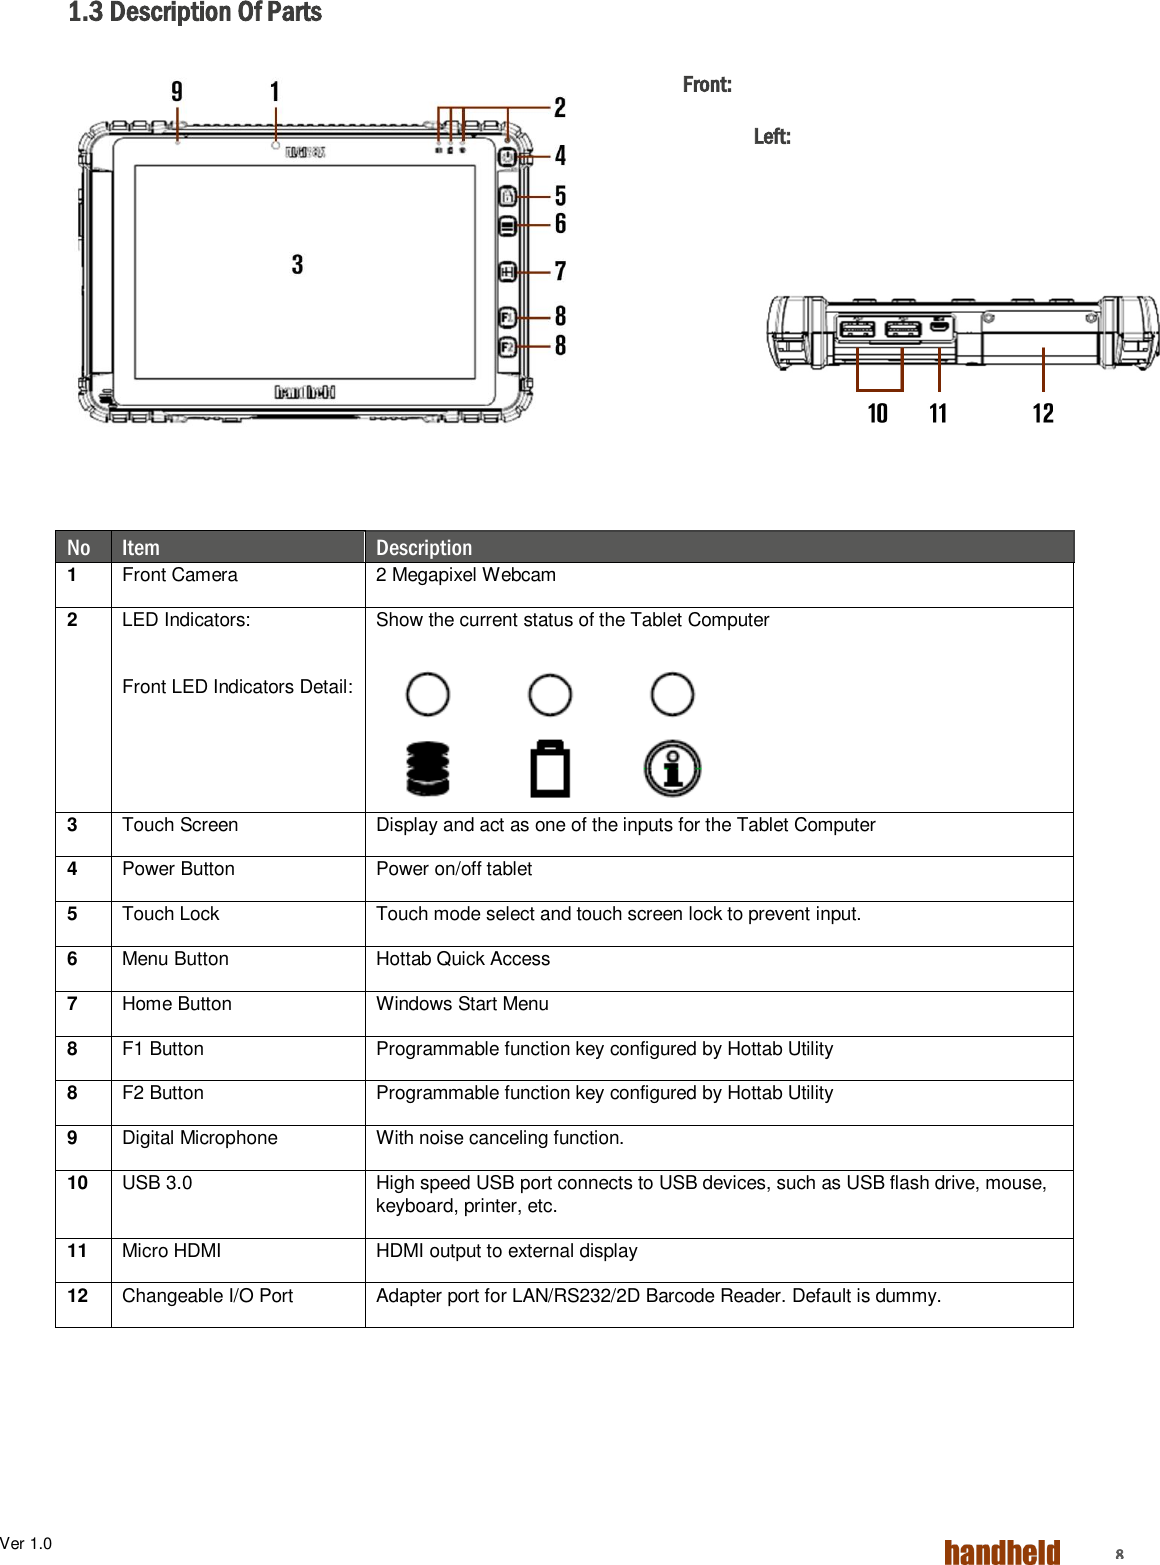 Ver 1.0    8 1.3 Description Of Parts Front:              Left:     No Item Description 1 Front Camera 2 Megapixel Webcam 2 LED Indicators:  Front LED Indicators Detail: Show the current status of the Tablet Computer 3 Touch Screen Display and act as one of the inputs for the Tablet Computer 4 Power Button Power on/off tablet 5 Touch Lock Touch mode select and touch screen lock to prevent input. 6  Menu Button Hottab Quick Access 7 Home Button Windows Start Menu 8 F1 Button Programmable function key configured by Hottab Utility 8 F2 Button Programmable function key configured by Hottab Utility 9 Digital Microphone With noise canceling function. 10 USB 3.0 High speed USB port connects to USB devices, such as USB flash drive, mouse, keyboard, printer, etc. 11 Micro HDMI HDMI output to external display 12 Changeable I/O Port Adapter port for LAN/RS232/2D Barcode Reader. Default is dummy. 